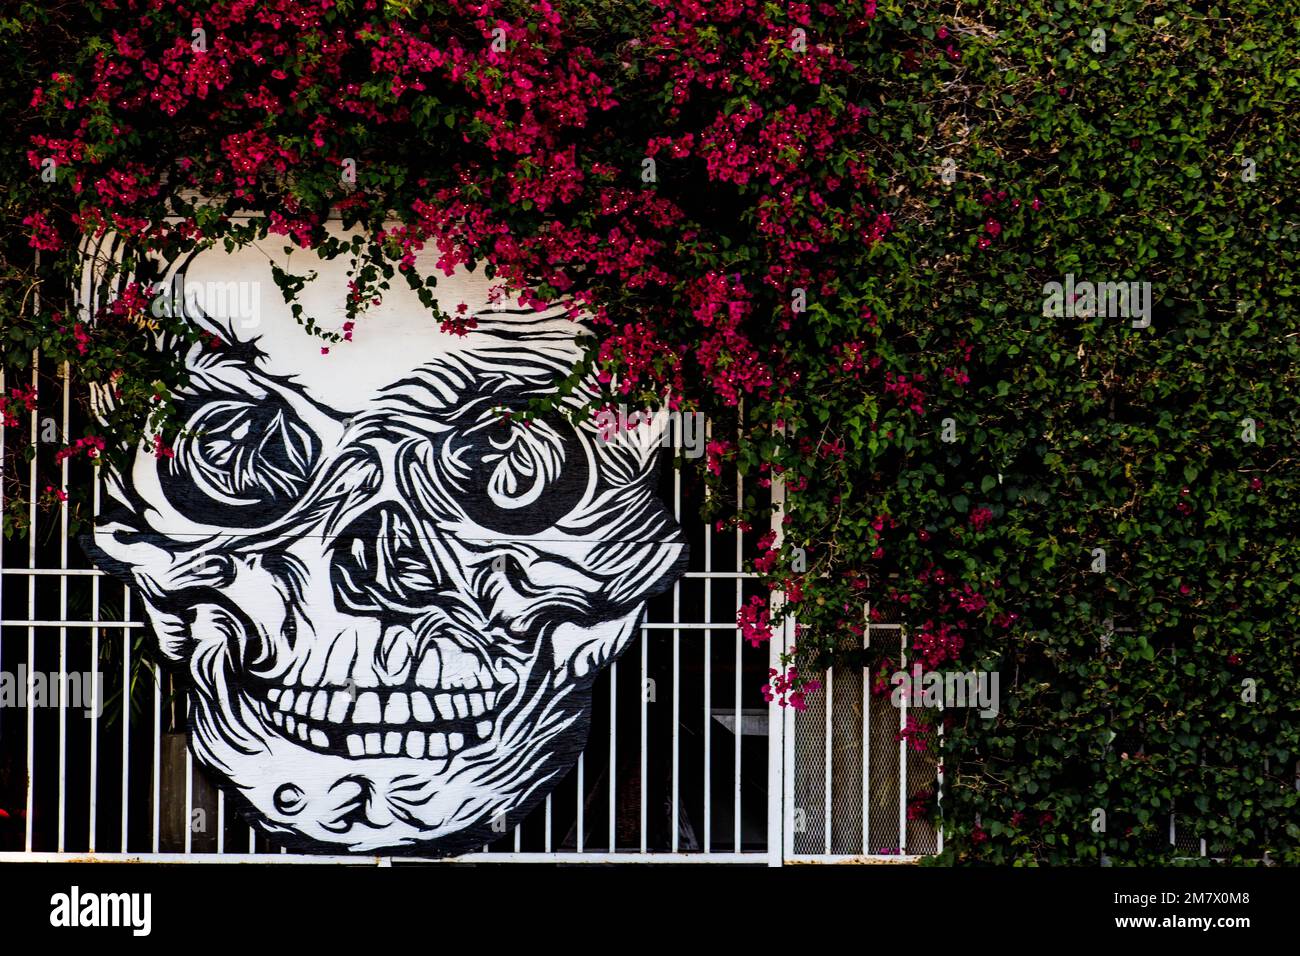 A skull on the fence with flowers on top and side. Stock Photo